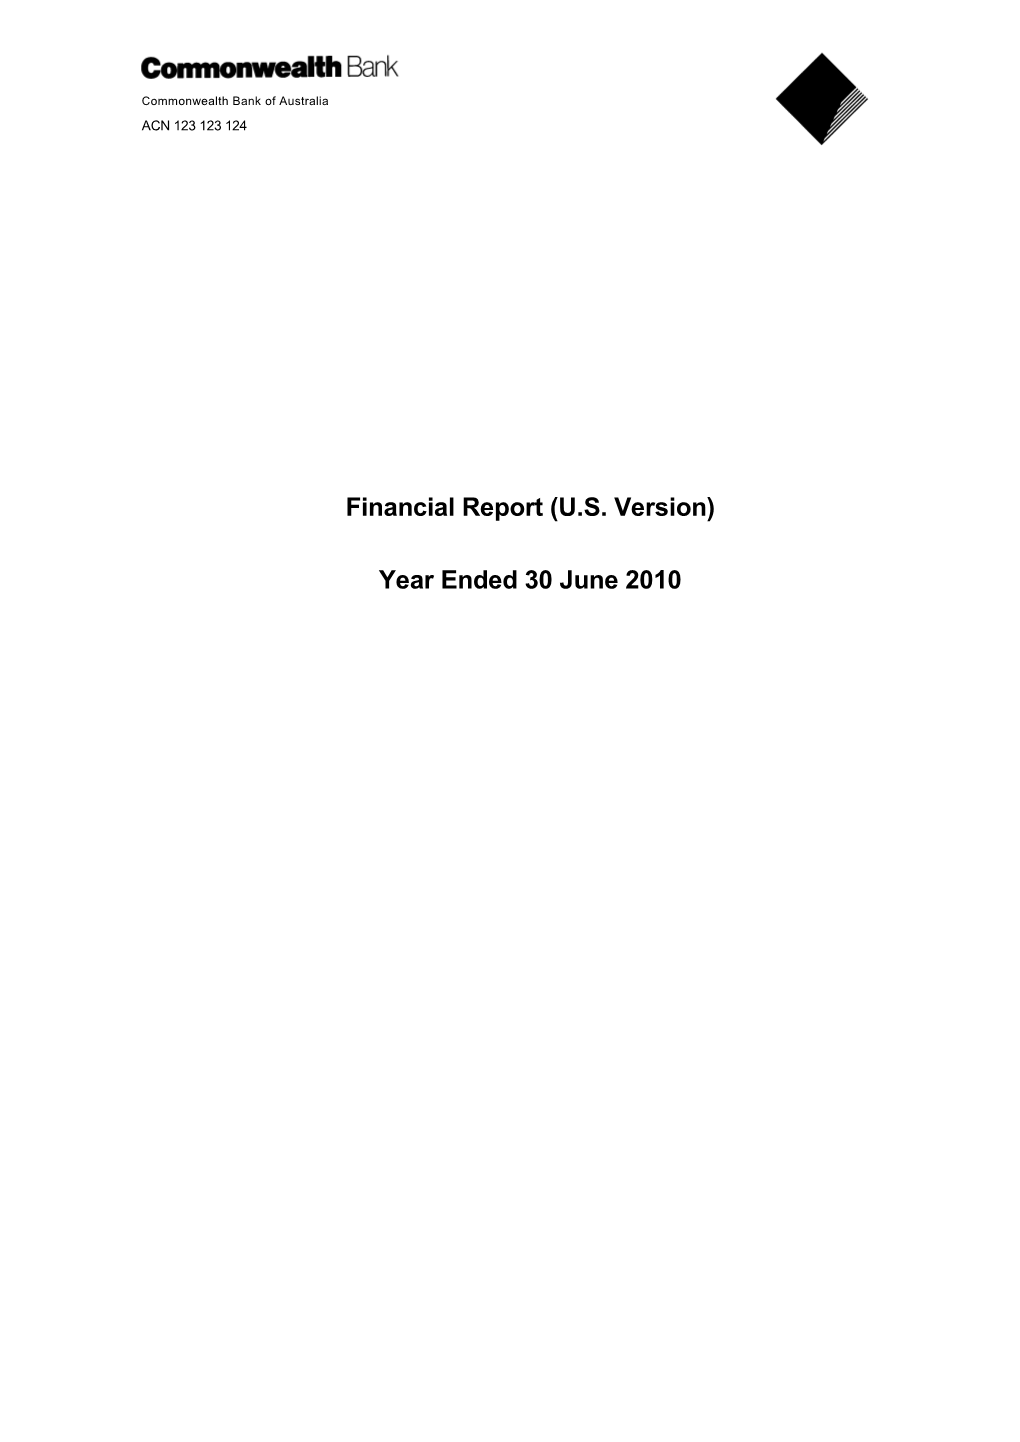 Financial Report (US Version) Year Ended 30 June 2010